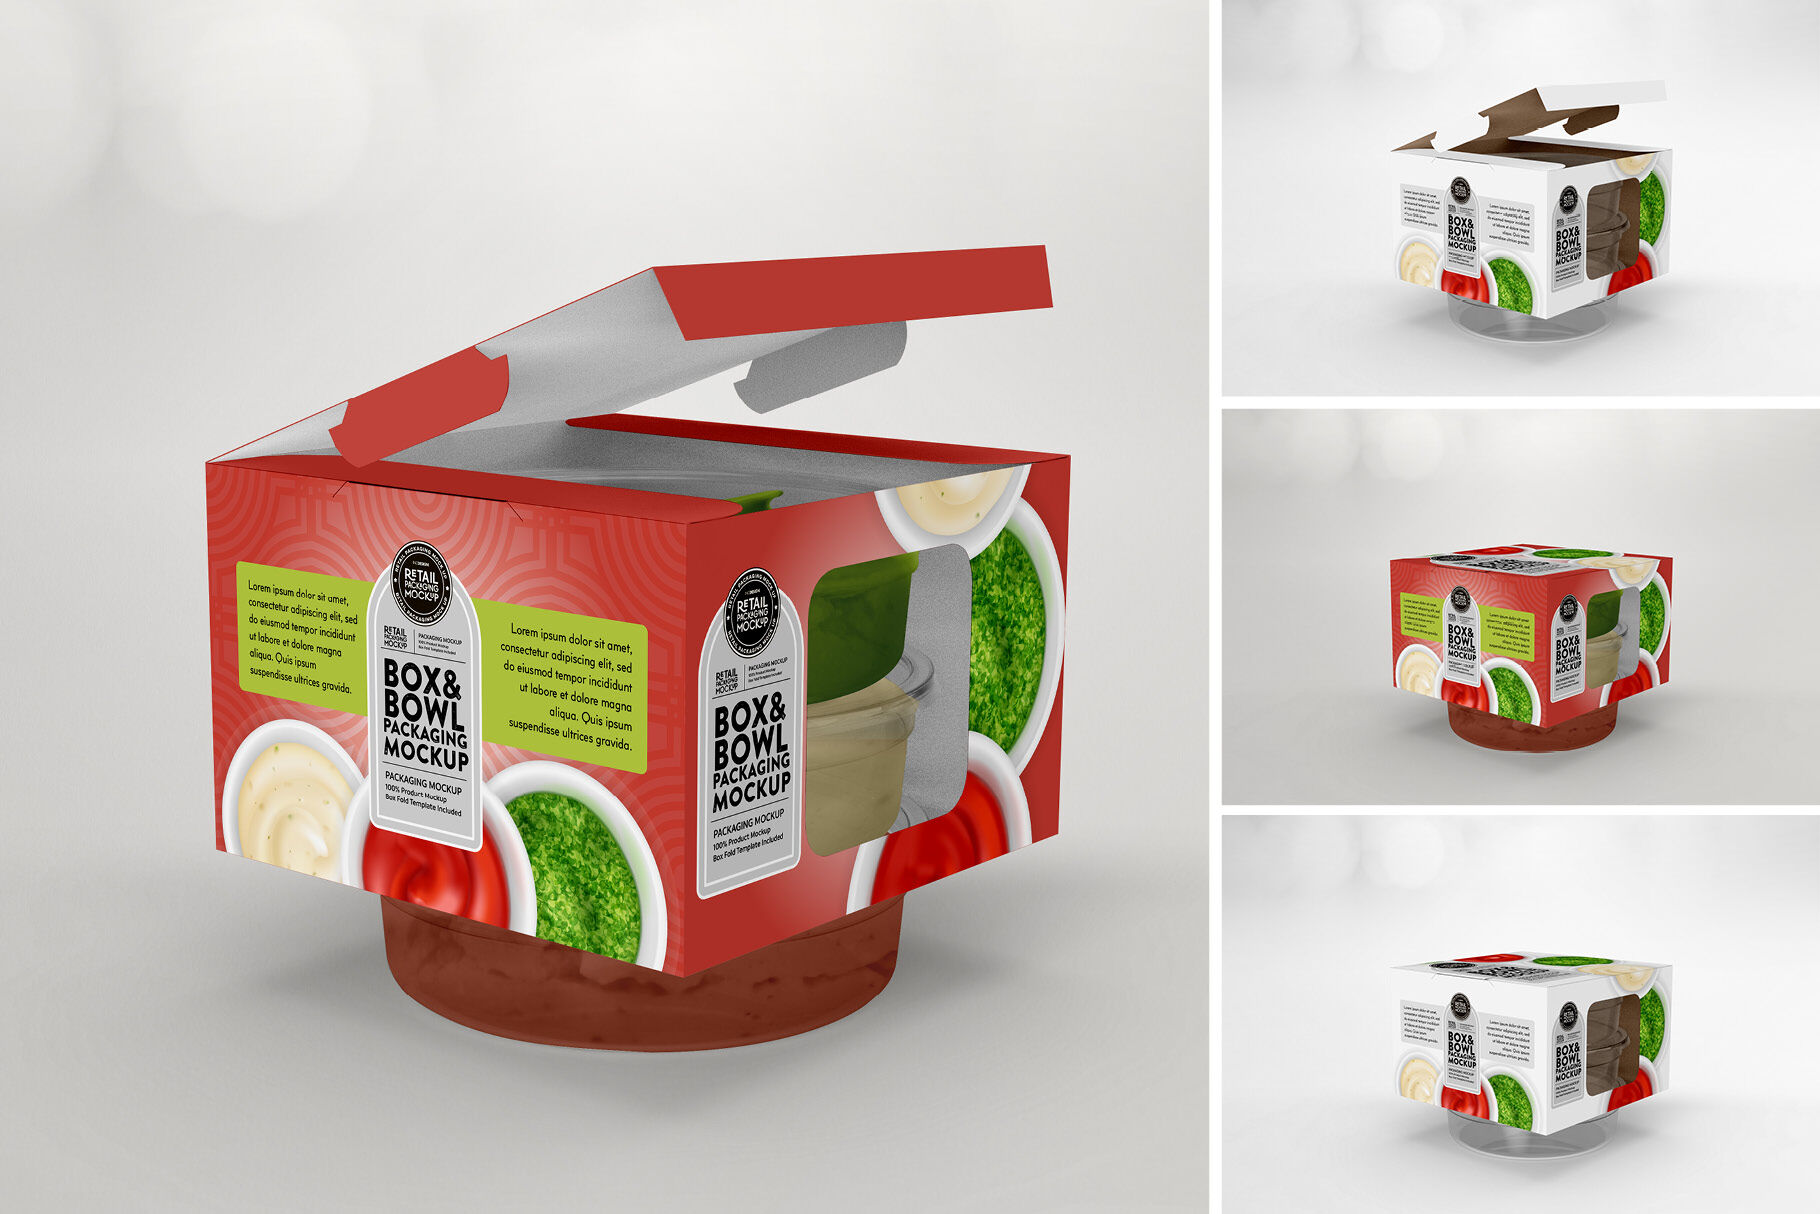 Download Box And Bowl Packaging Mockup By Inc Design Studio Thehungryjpeg Com